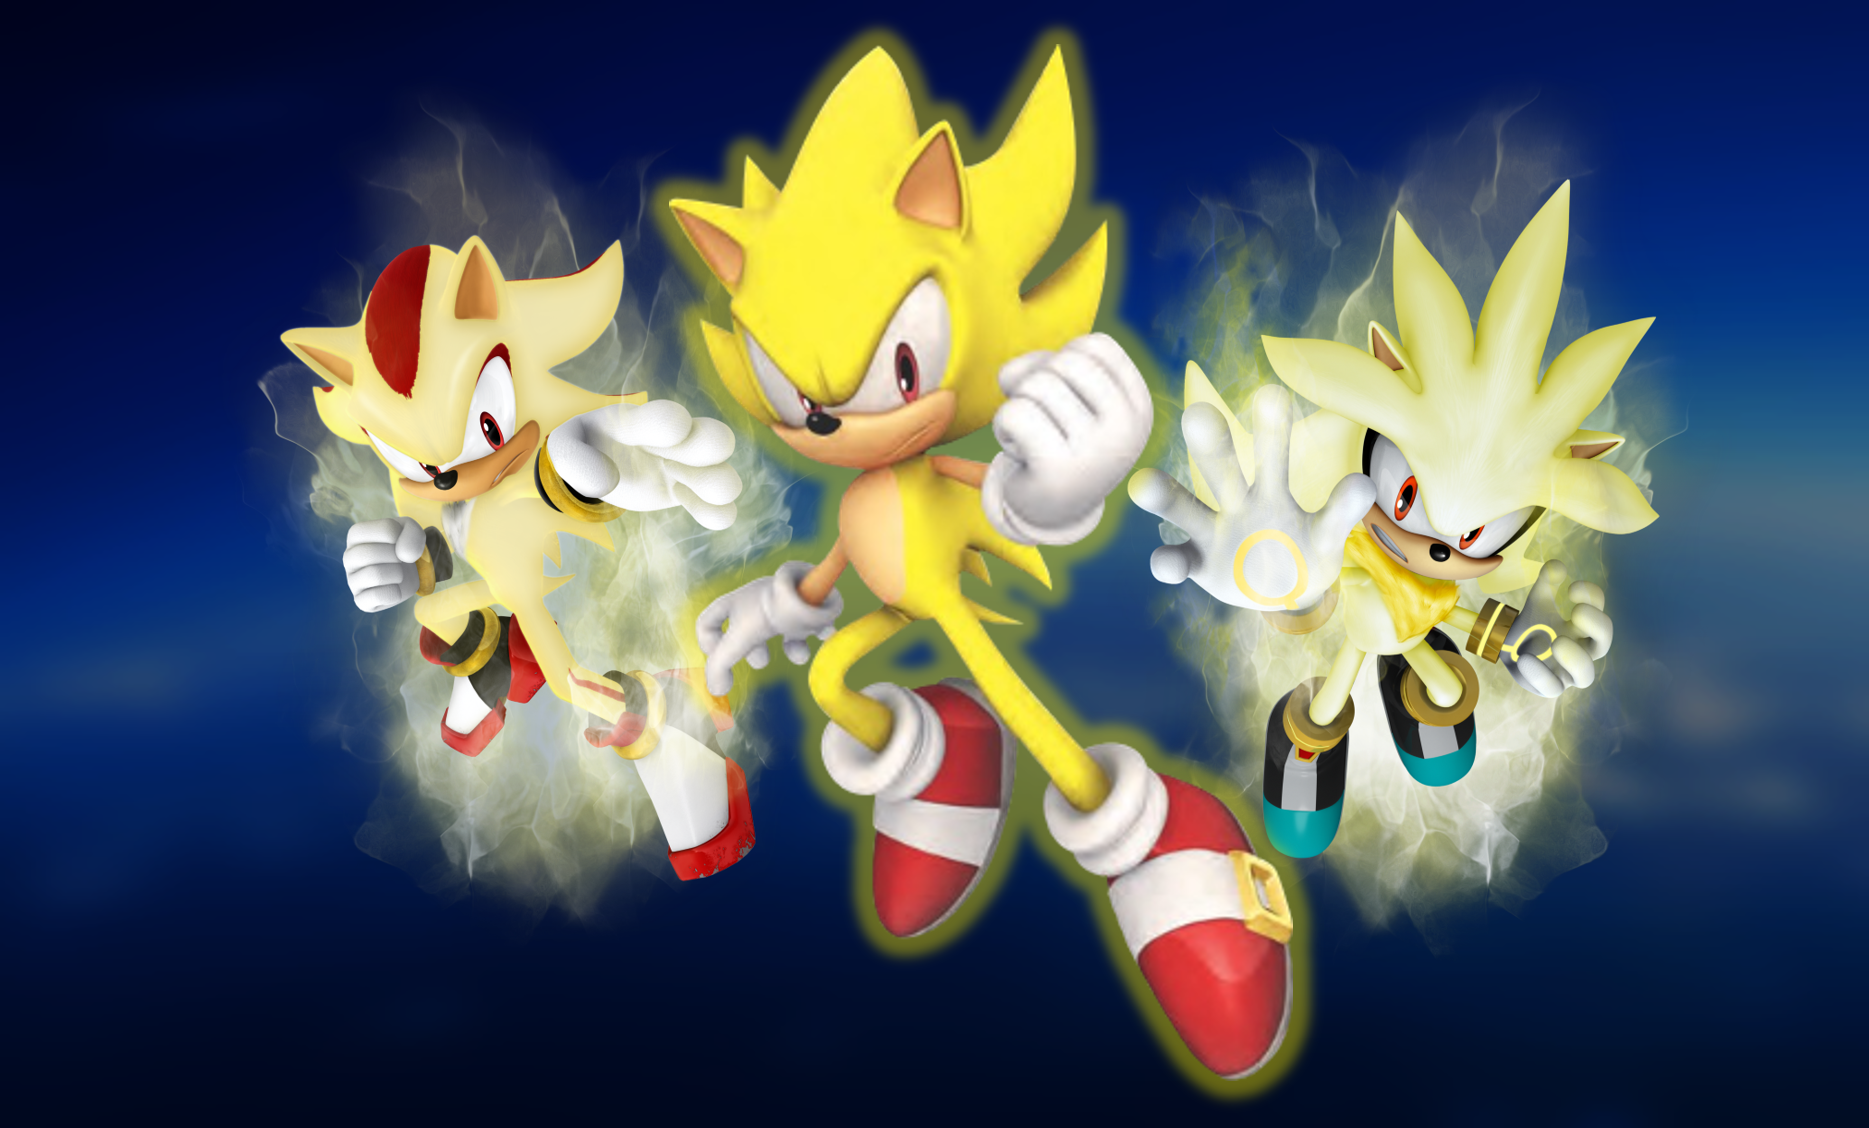 sonic and shadow wallpapers wallpaper cave on super sonic and super shadow wallpapers